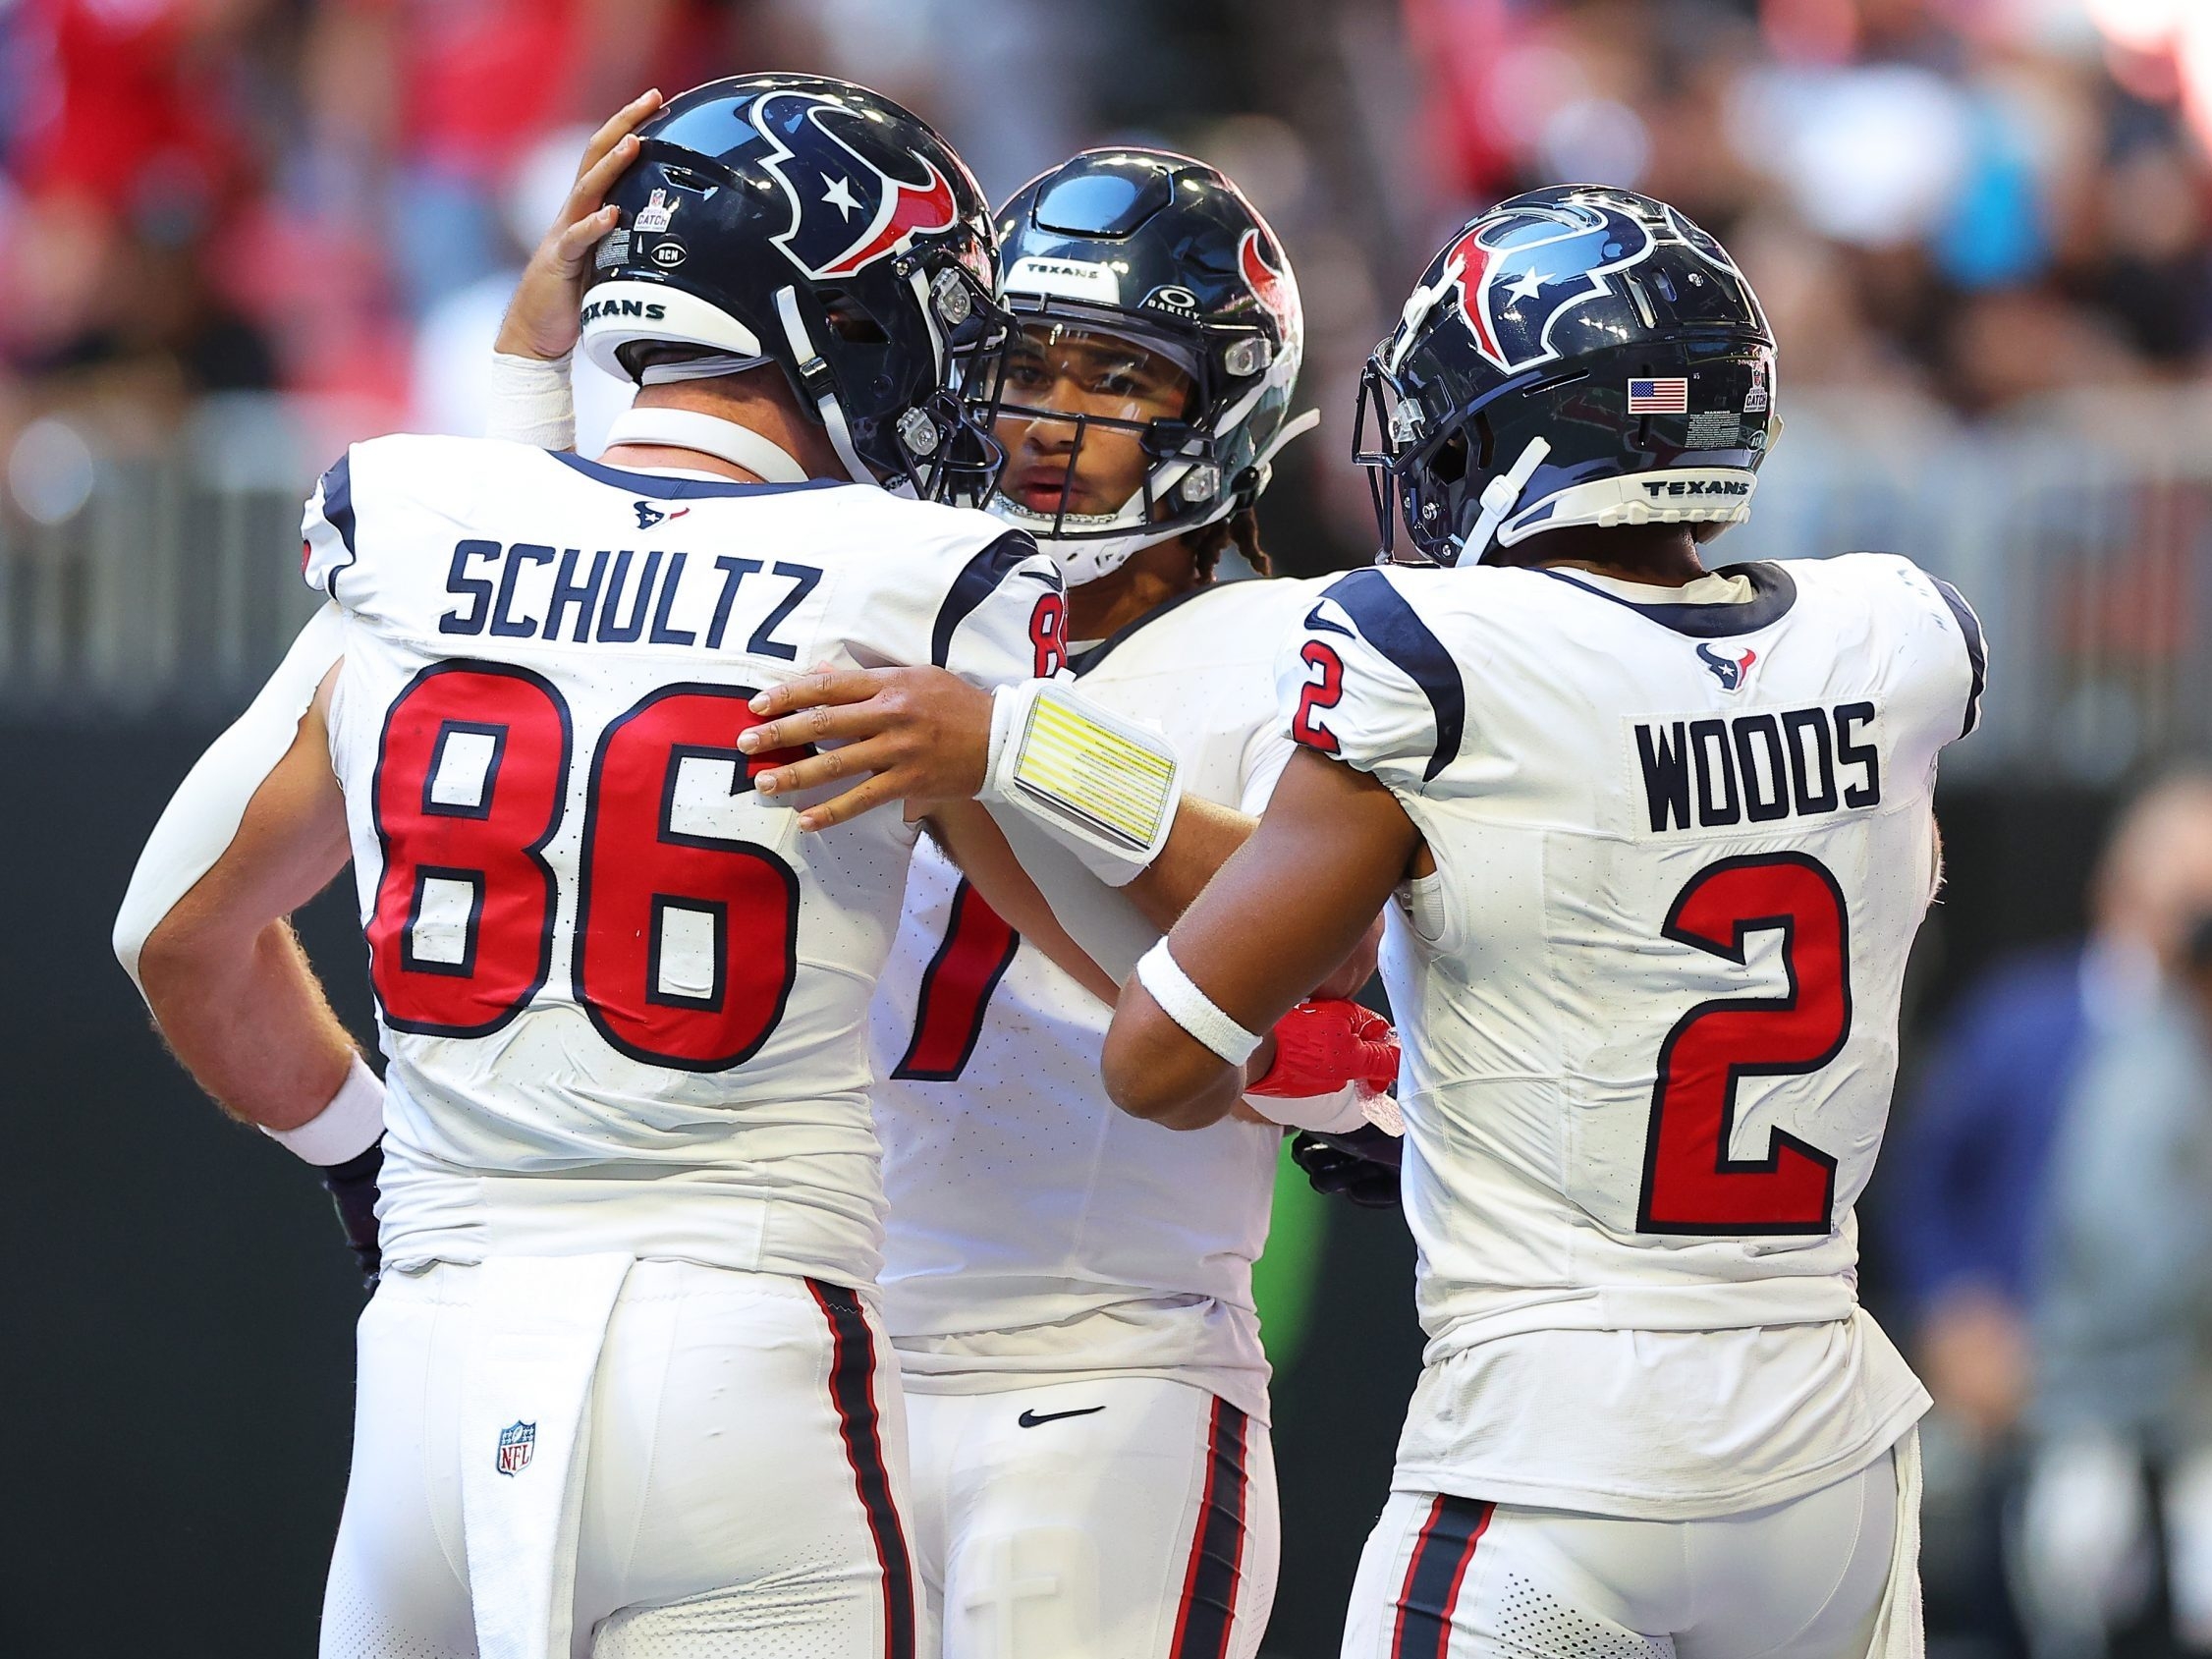 In Photos: The Houston Texans Play Their First Home Game